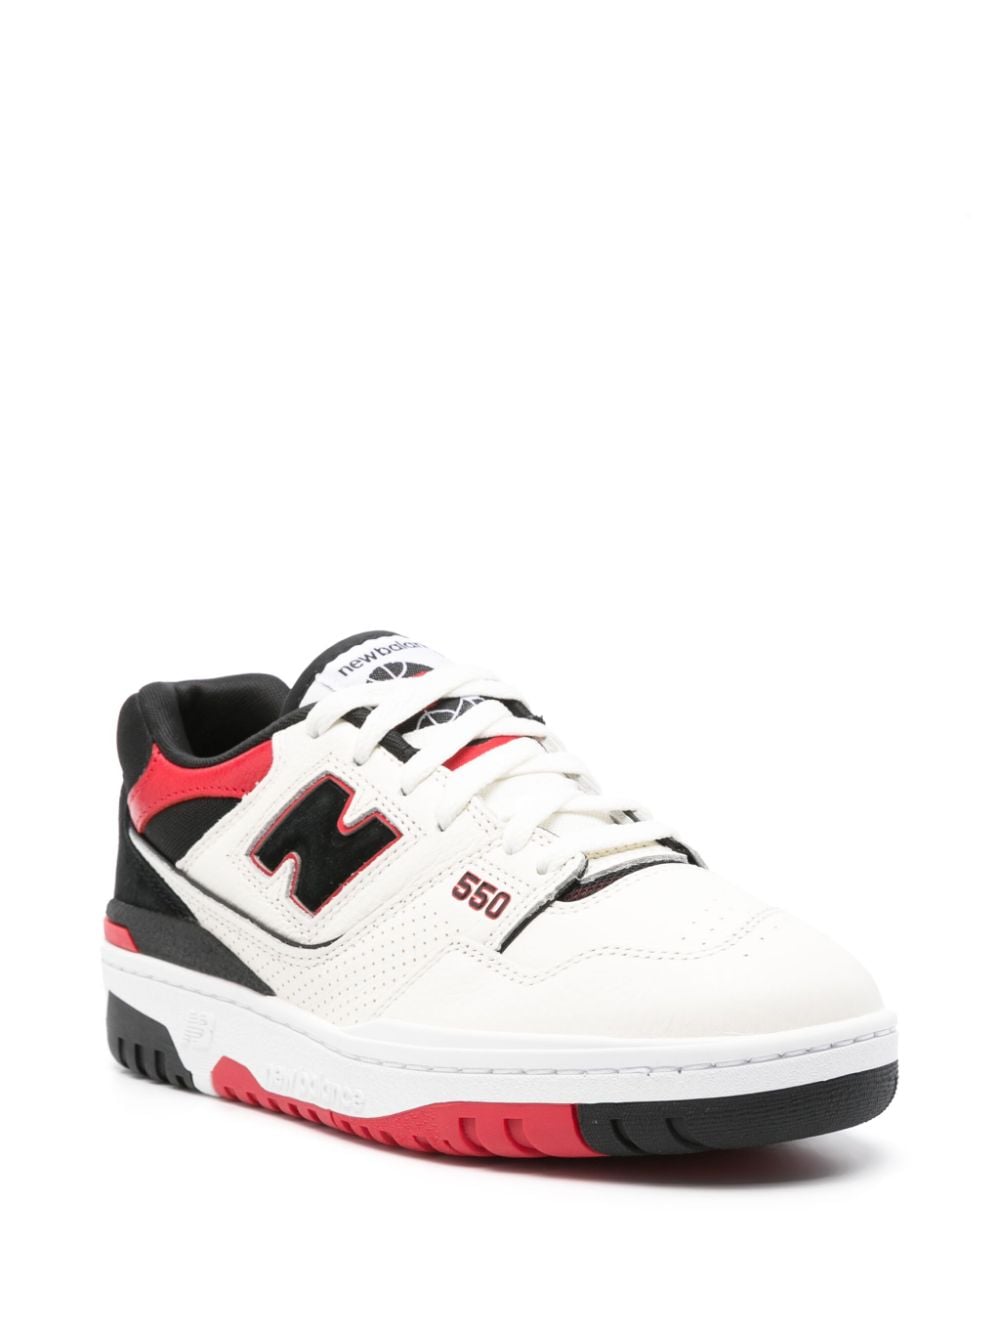 New Balance Sneakers Red